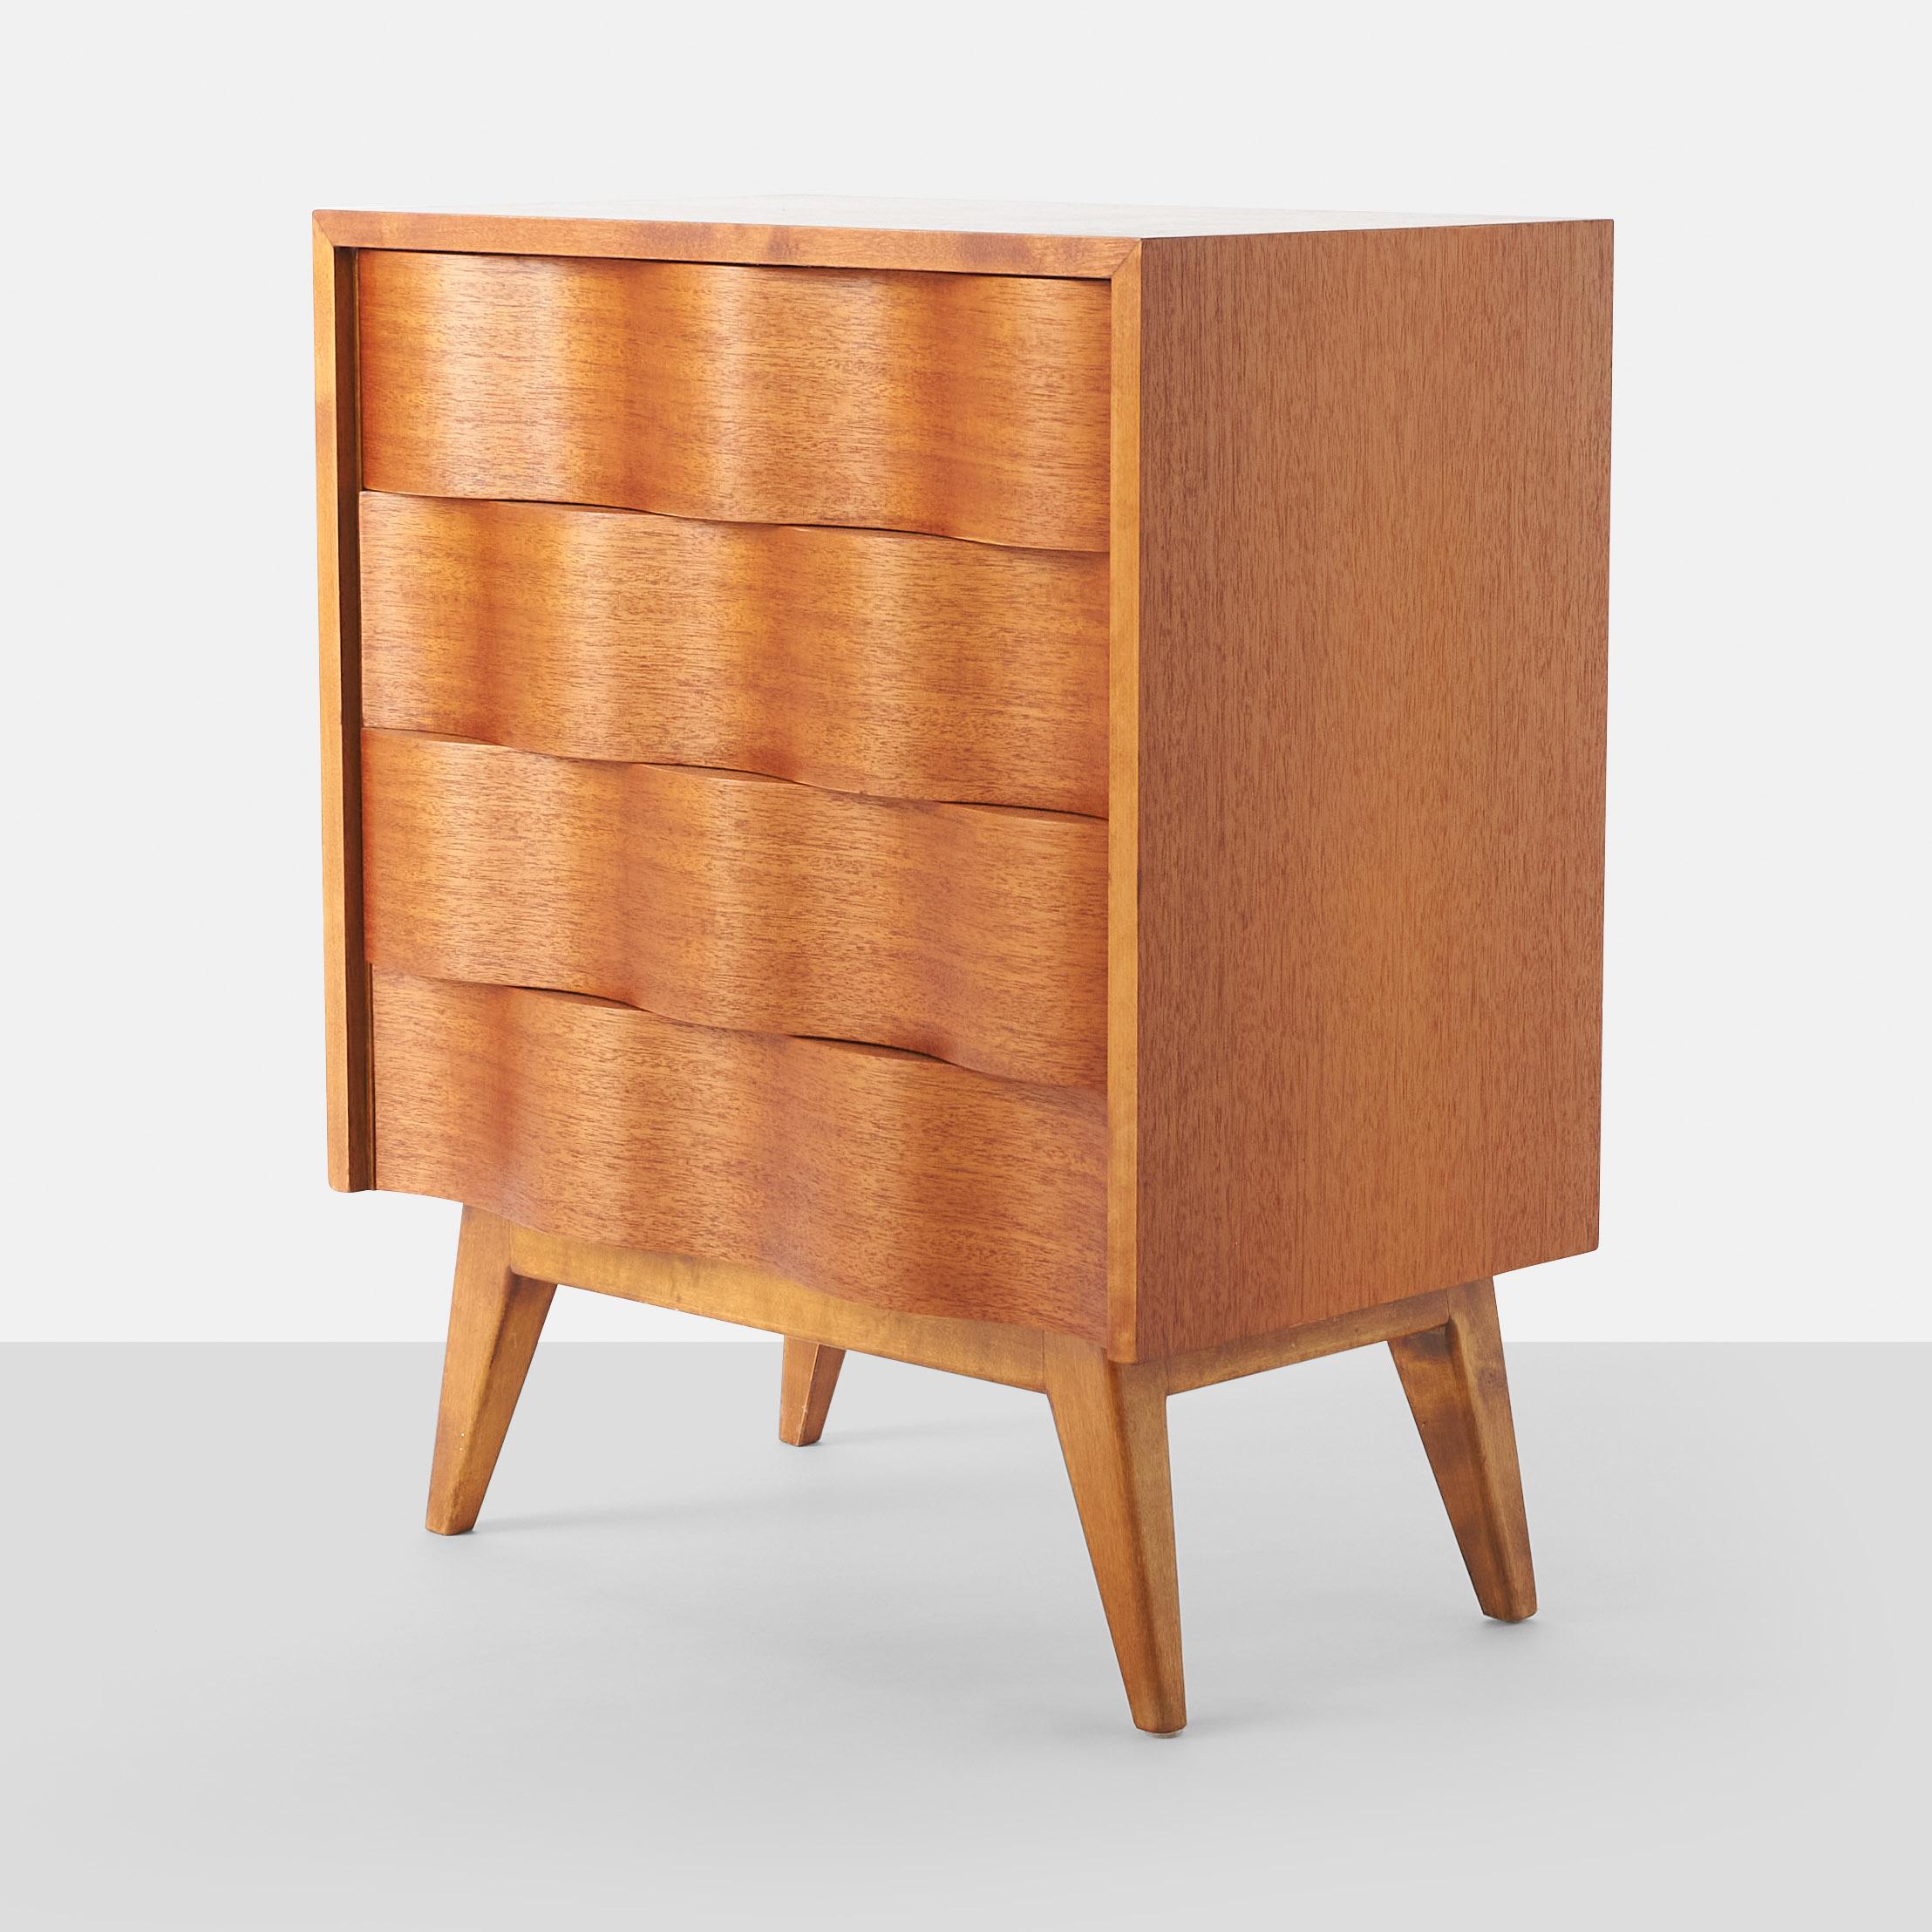 A four drawer chest in birch, known as the 